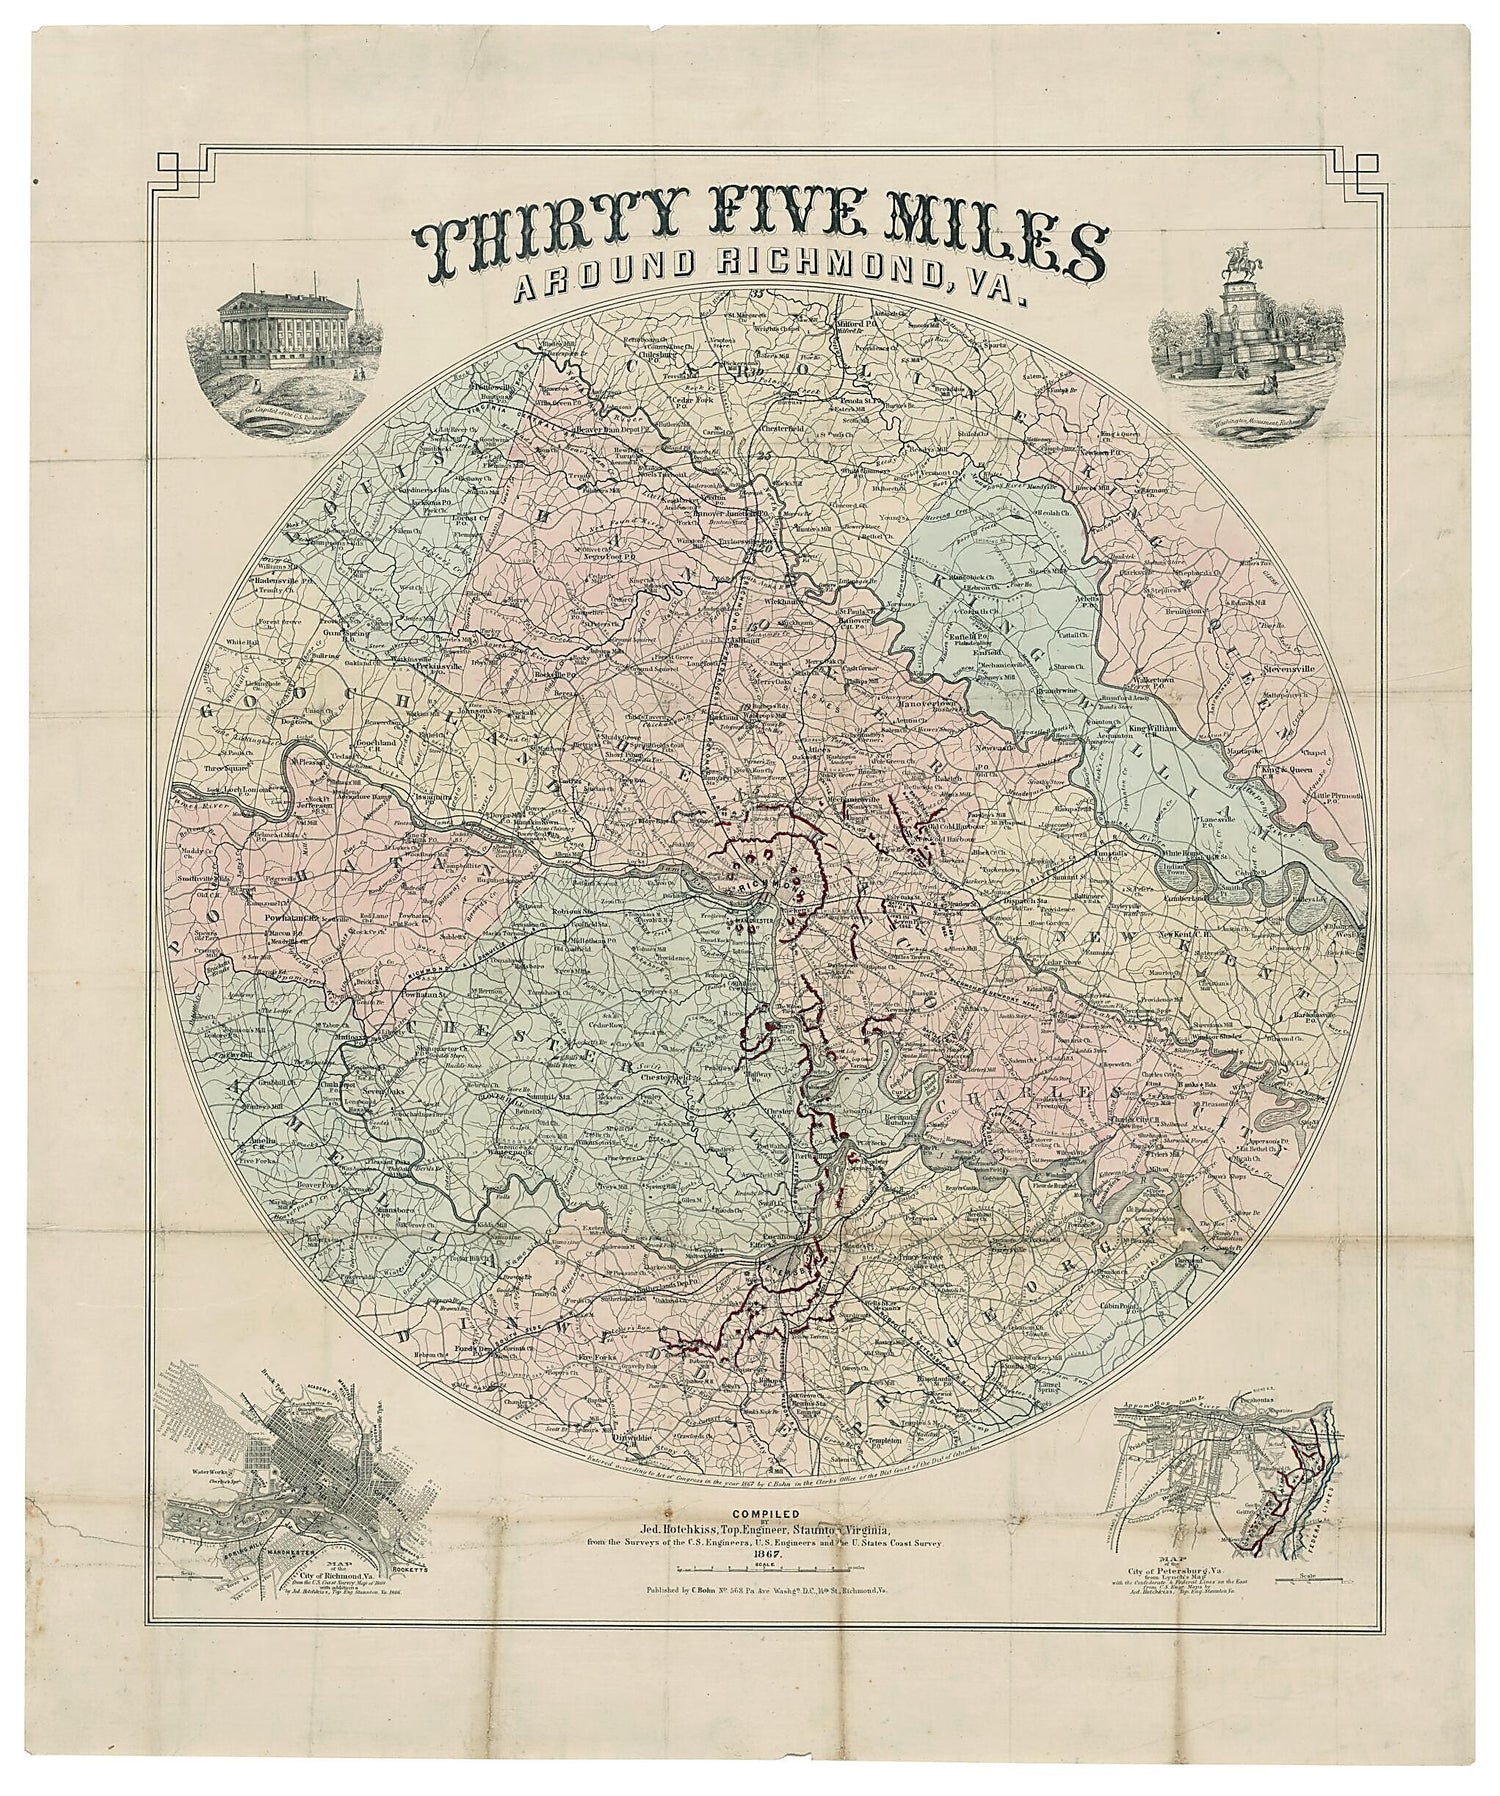 This old map of Thirty Five Miles Around Richmond, Va from 1867 was created by Jedediah Hotchkiss in 1867